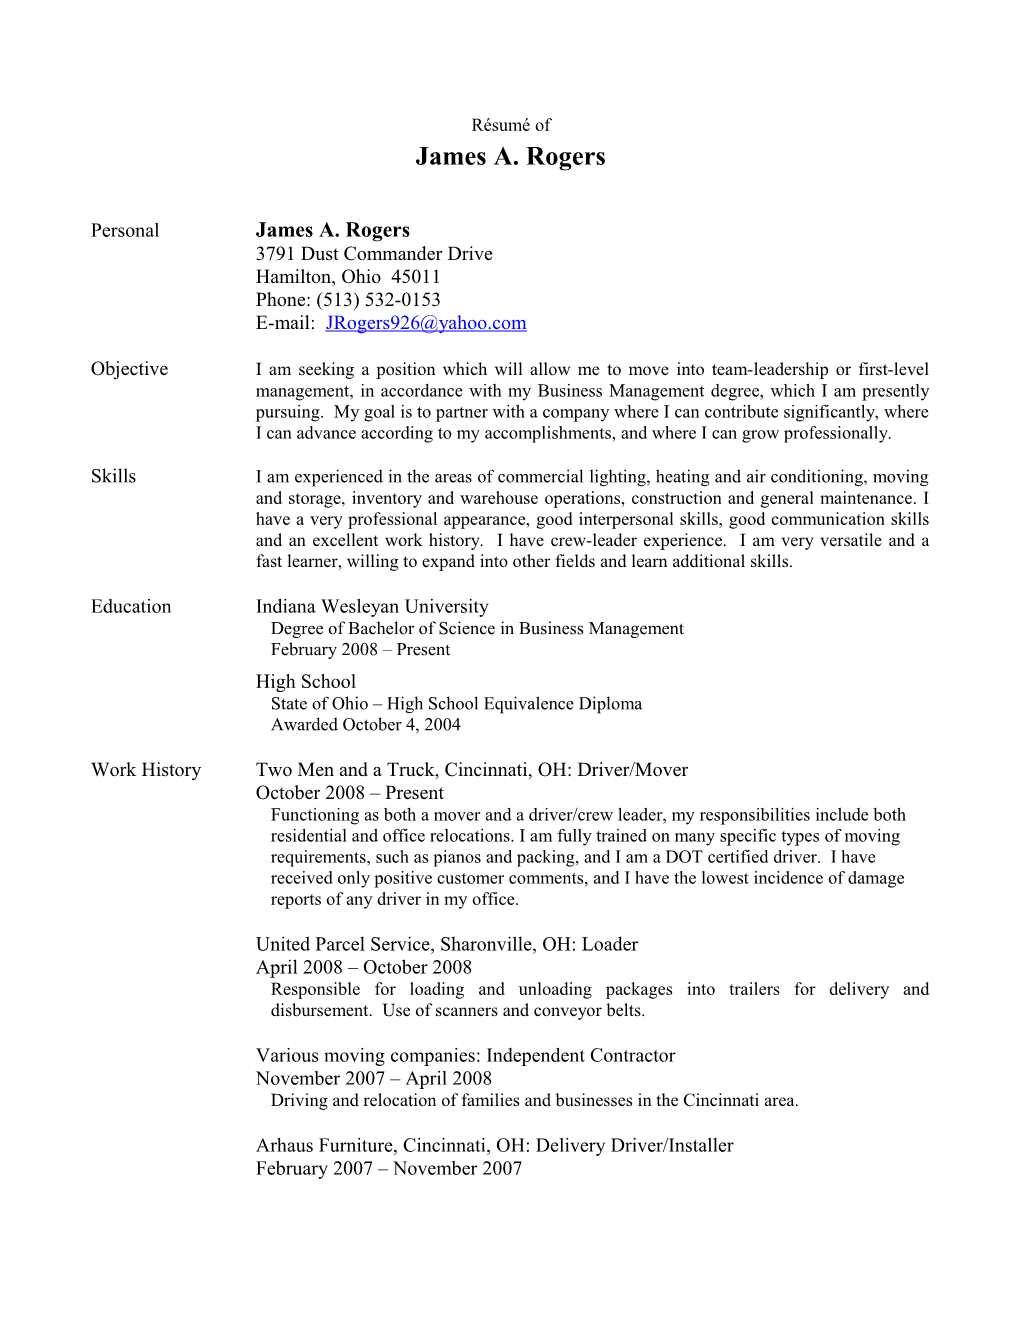 Resume of James Rogers